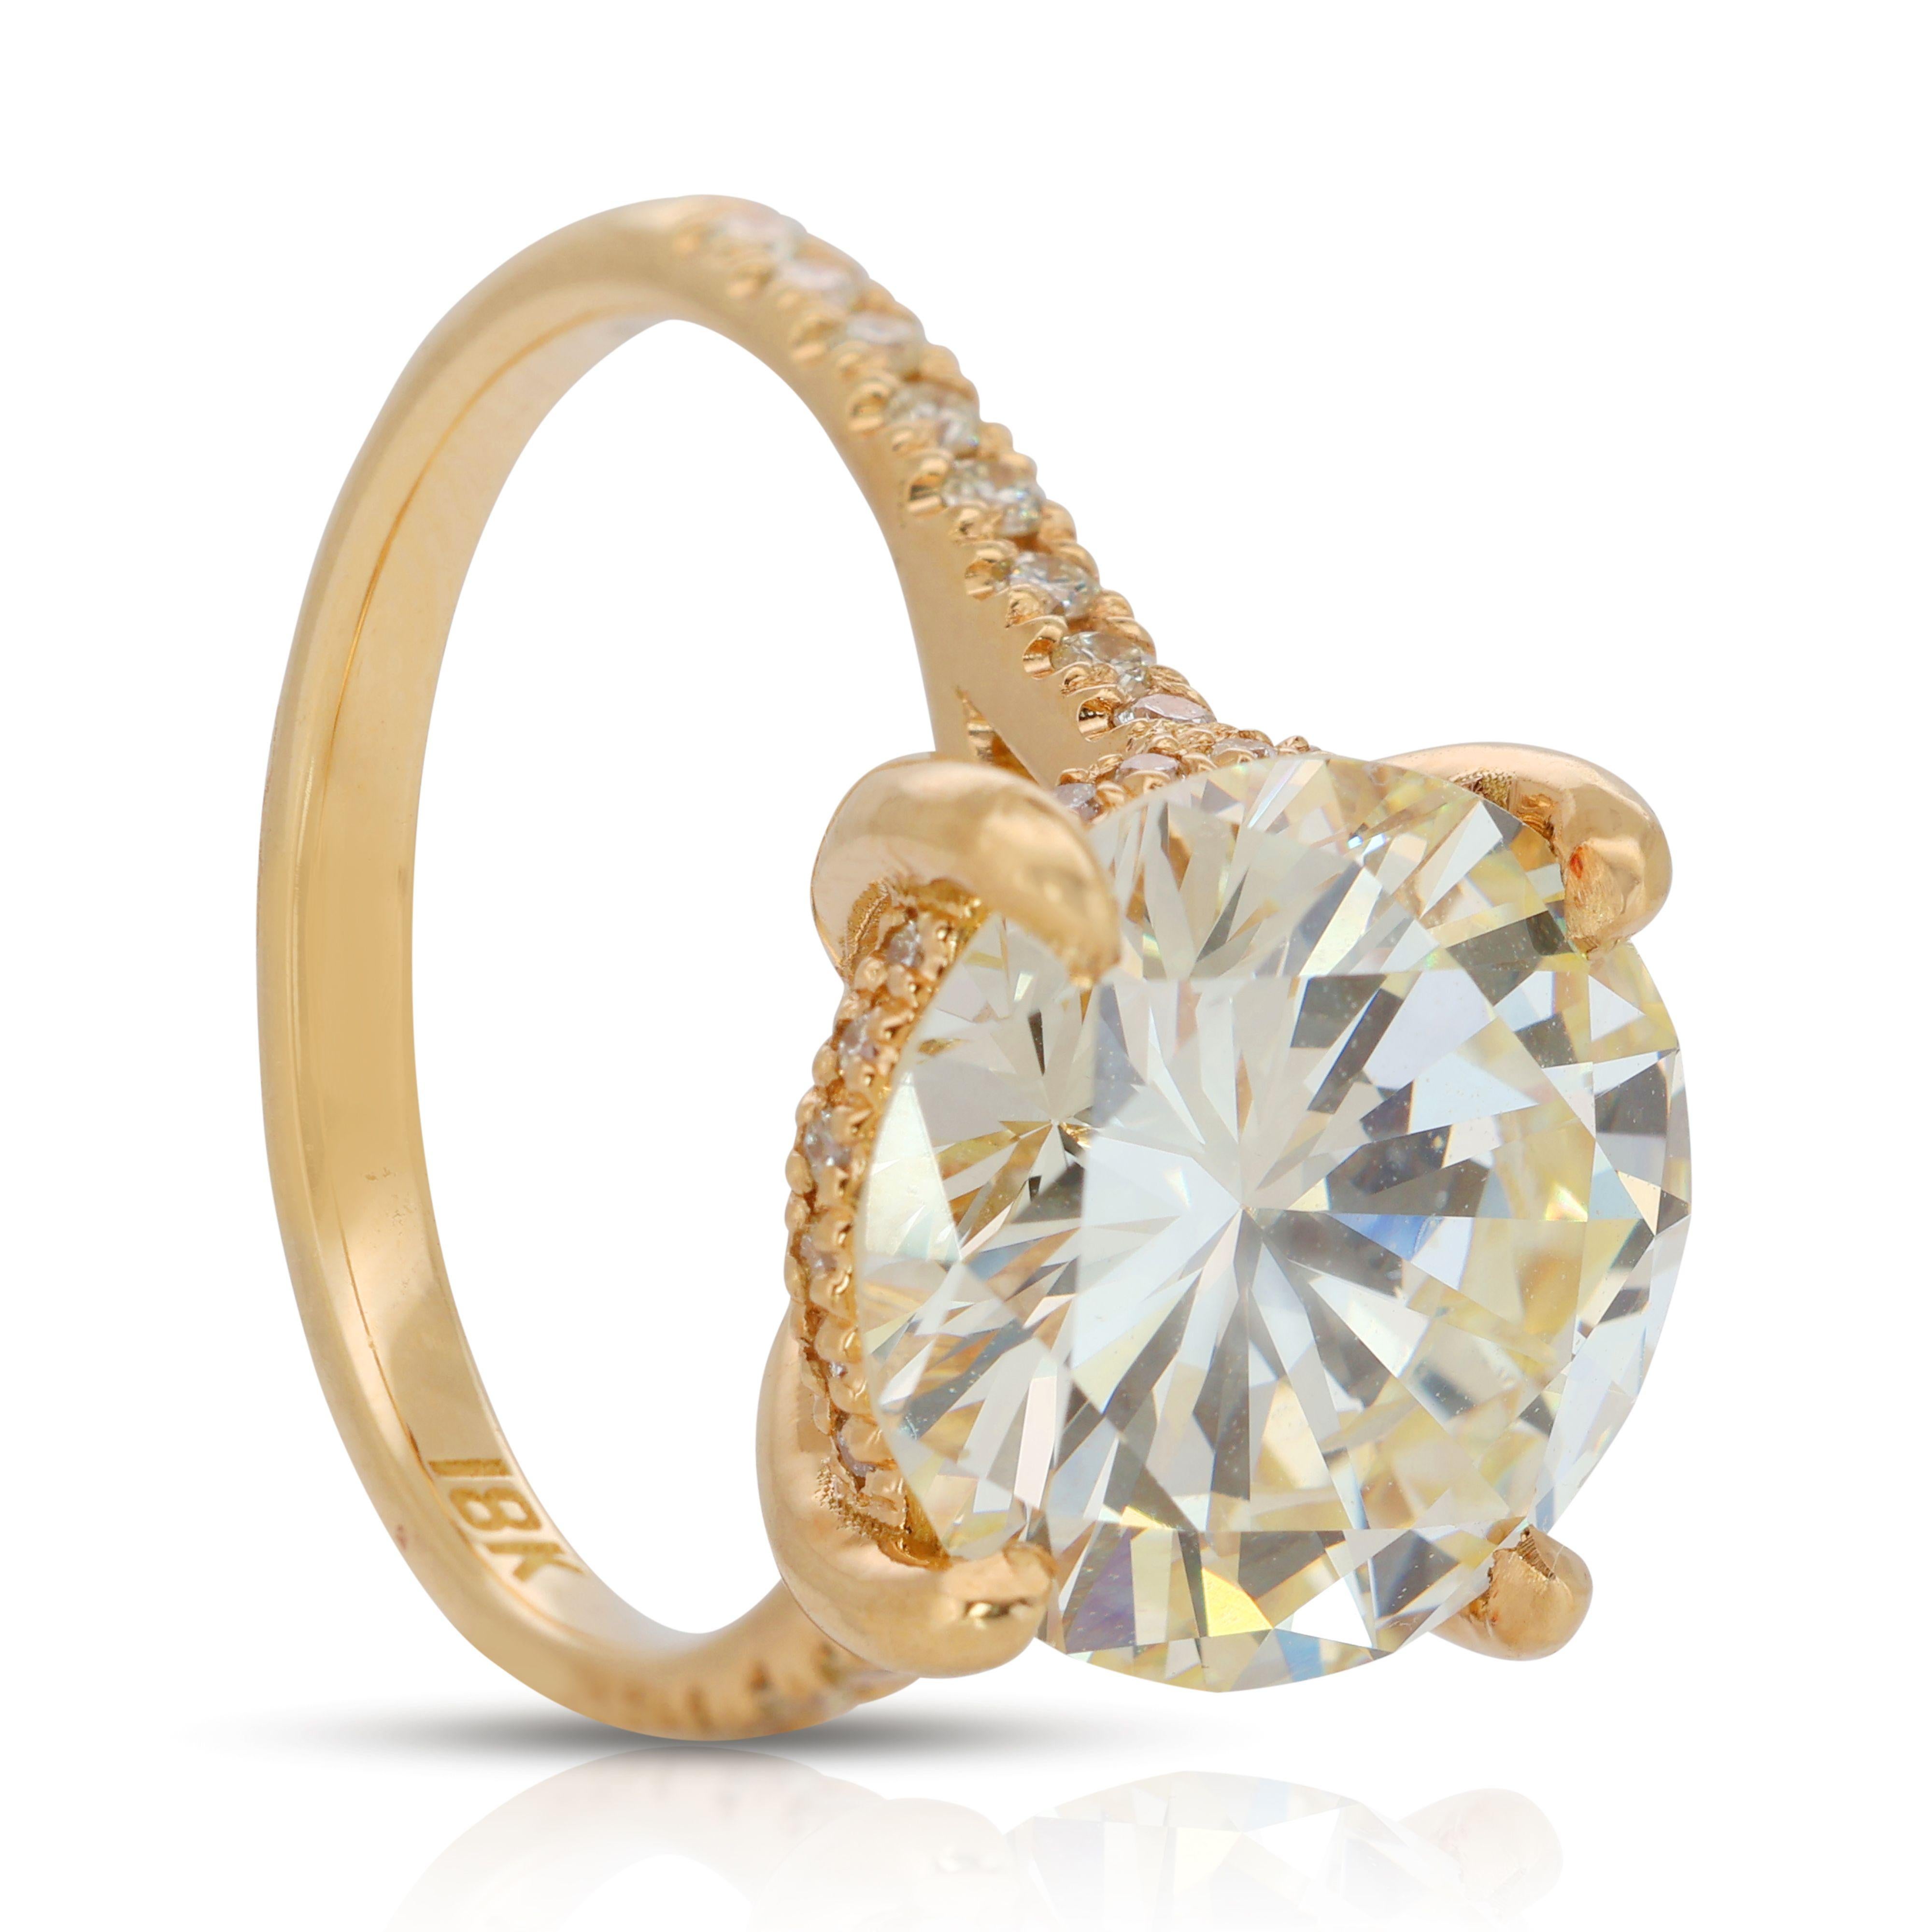 Captivating 3.77ct Pave Diamond Ring in 18K Yellow Gold For Sale 3